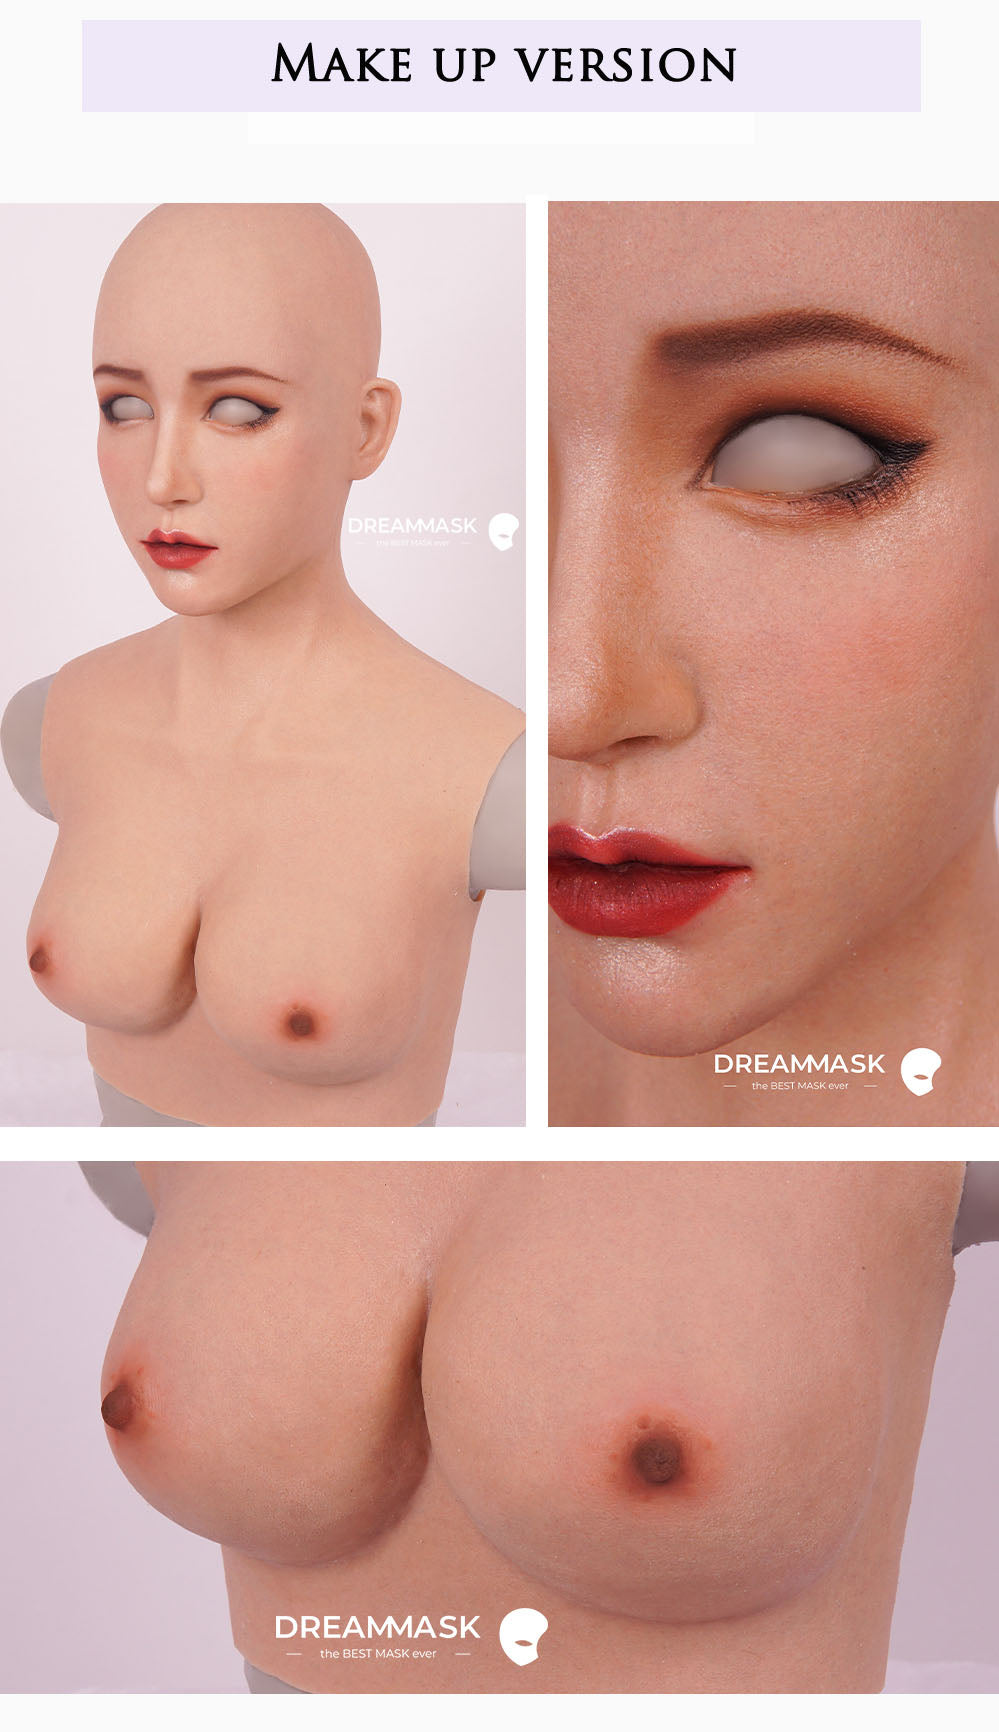 Full head Silicone Female Mask Hebe with C Cup Breasts Pull-Over Hood Corssdress Cosplay for TG CD Dragqueen Ladyboy with Cleavage and Realistic trembling Feeling